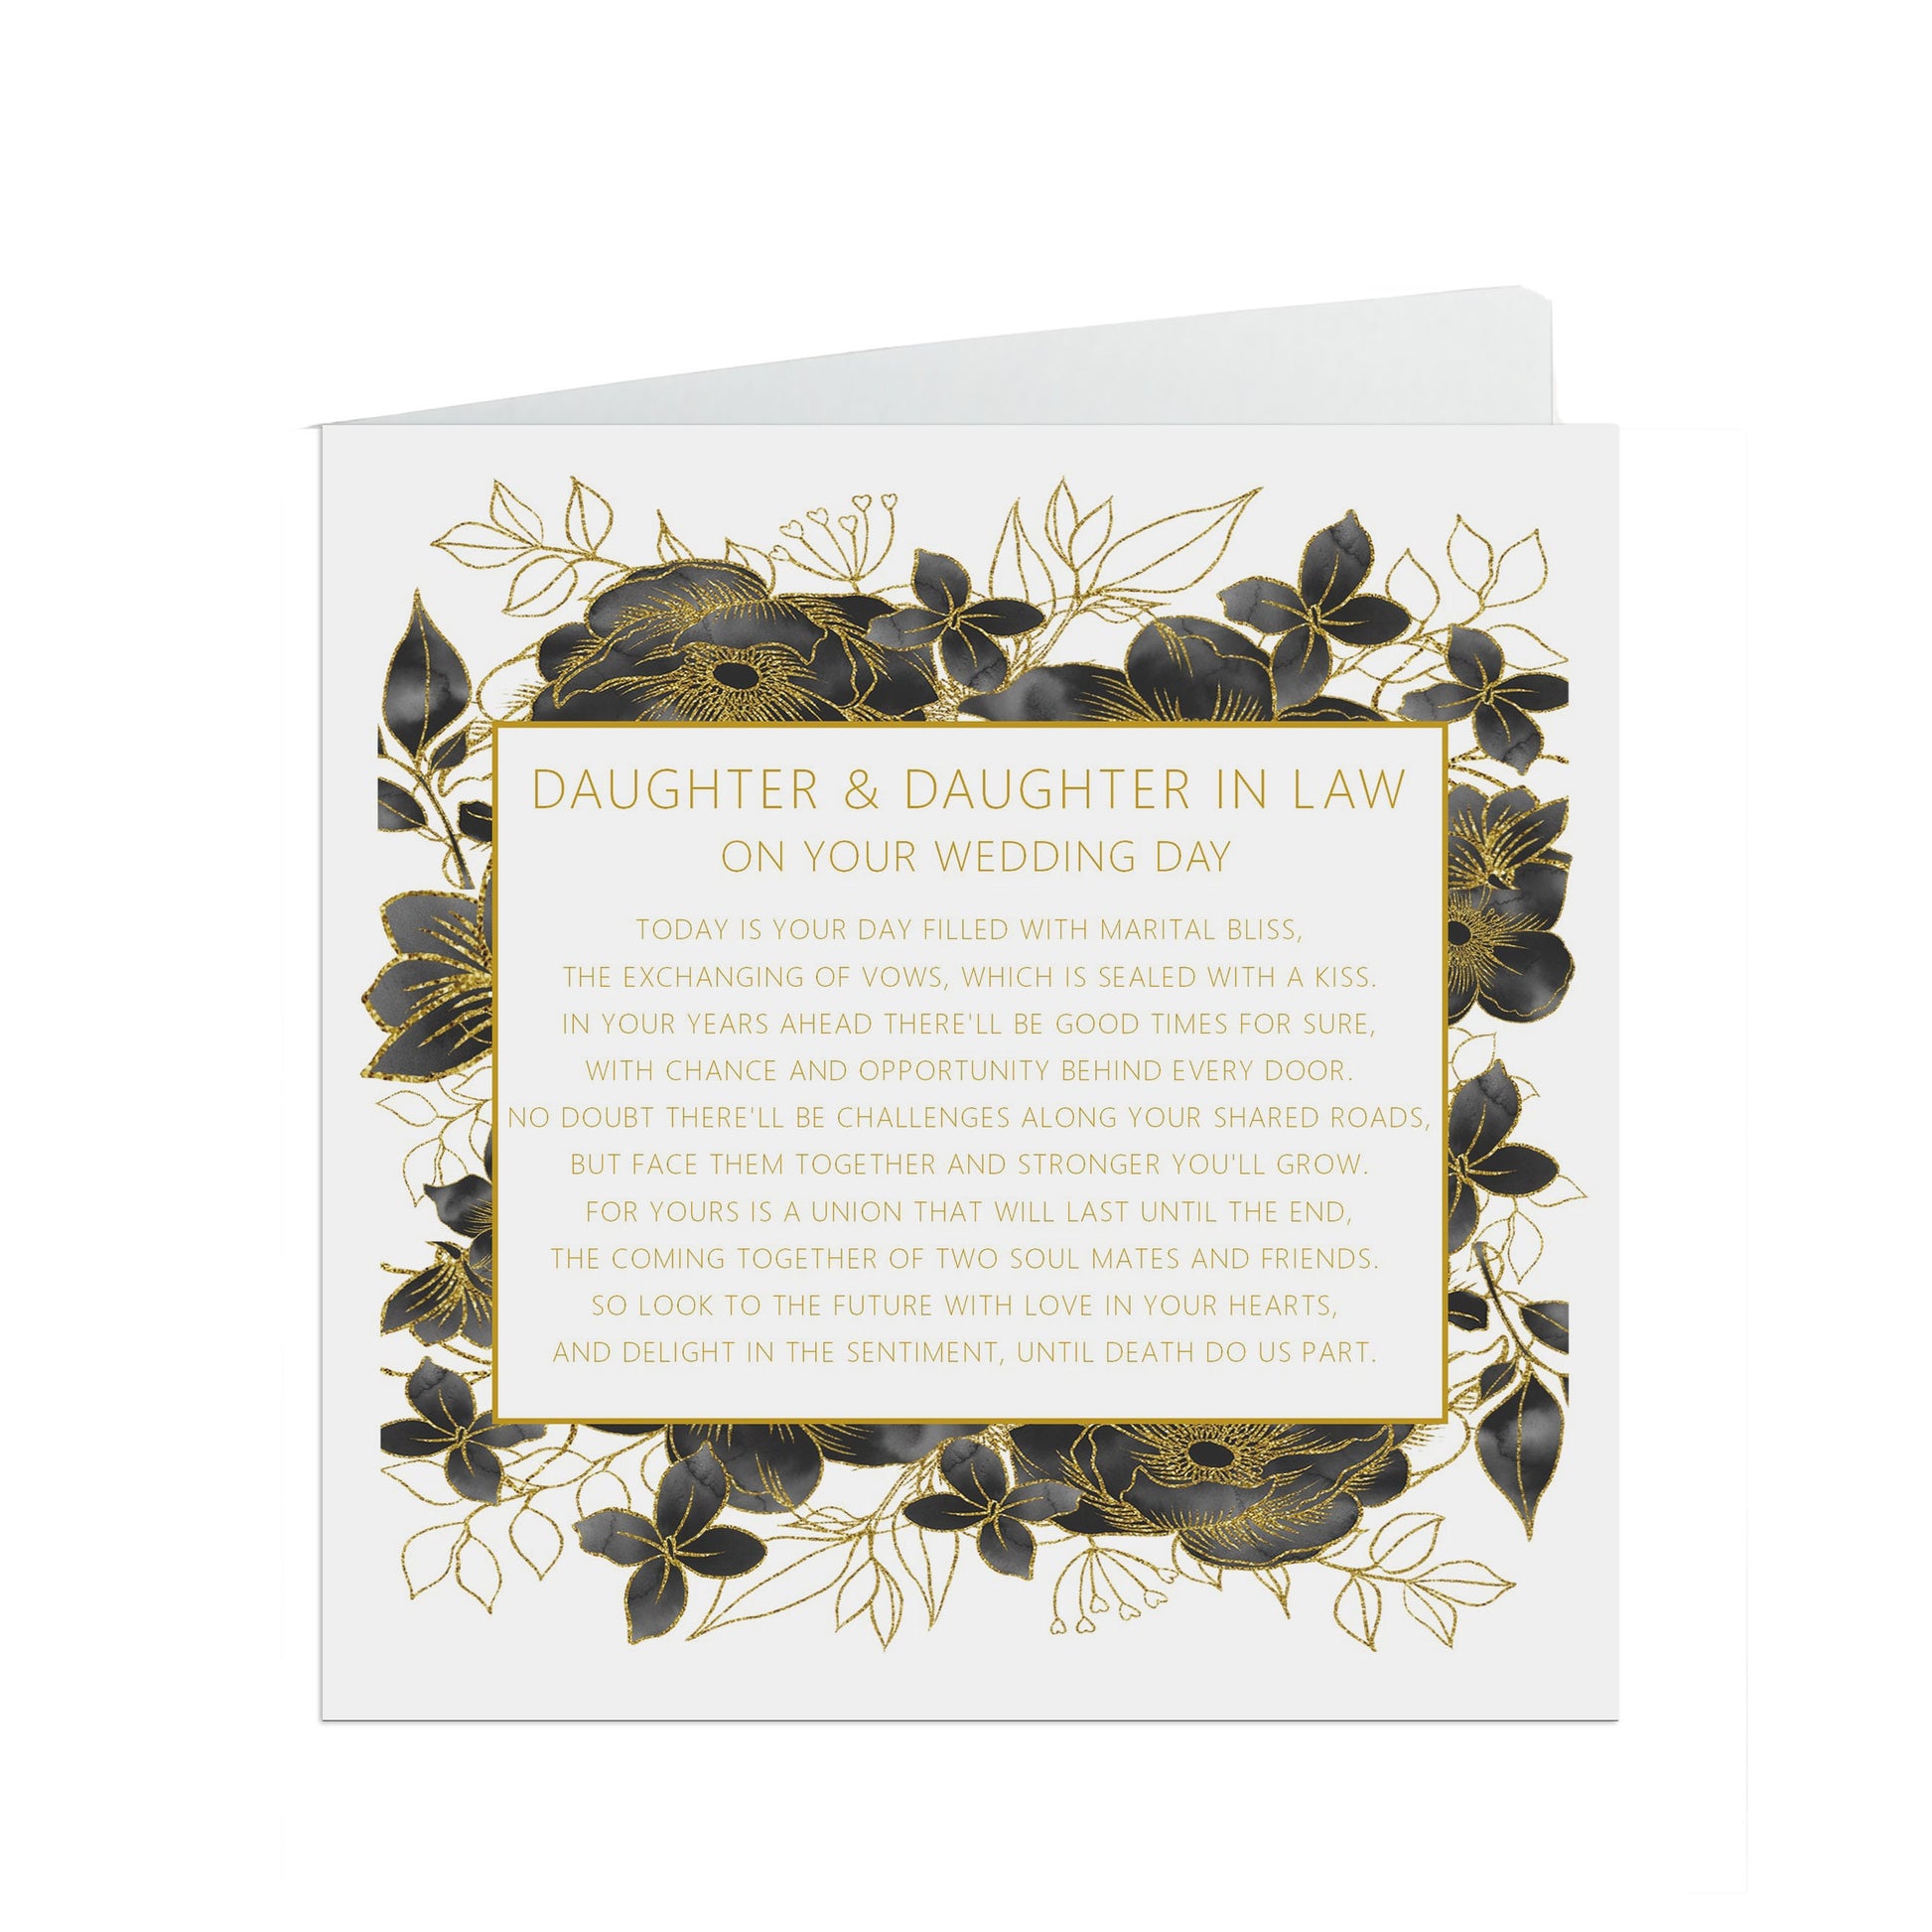 Daughter & Daughter In Law On Your Wedding Day Card, Black And Gold Floral 6x6 Inches With A White Envelope